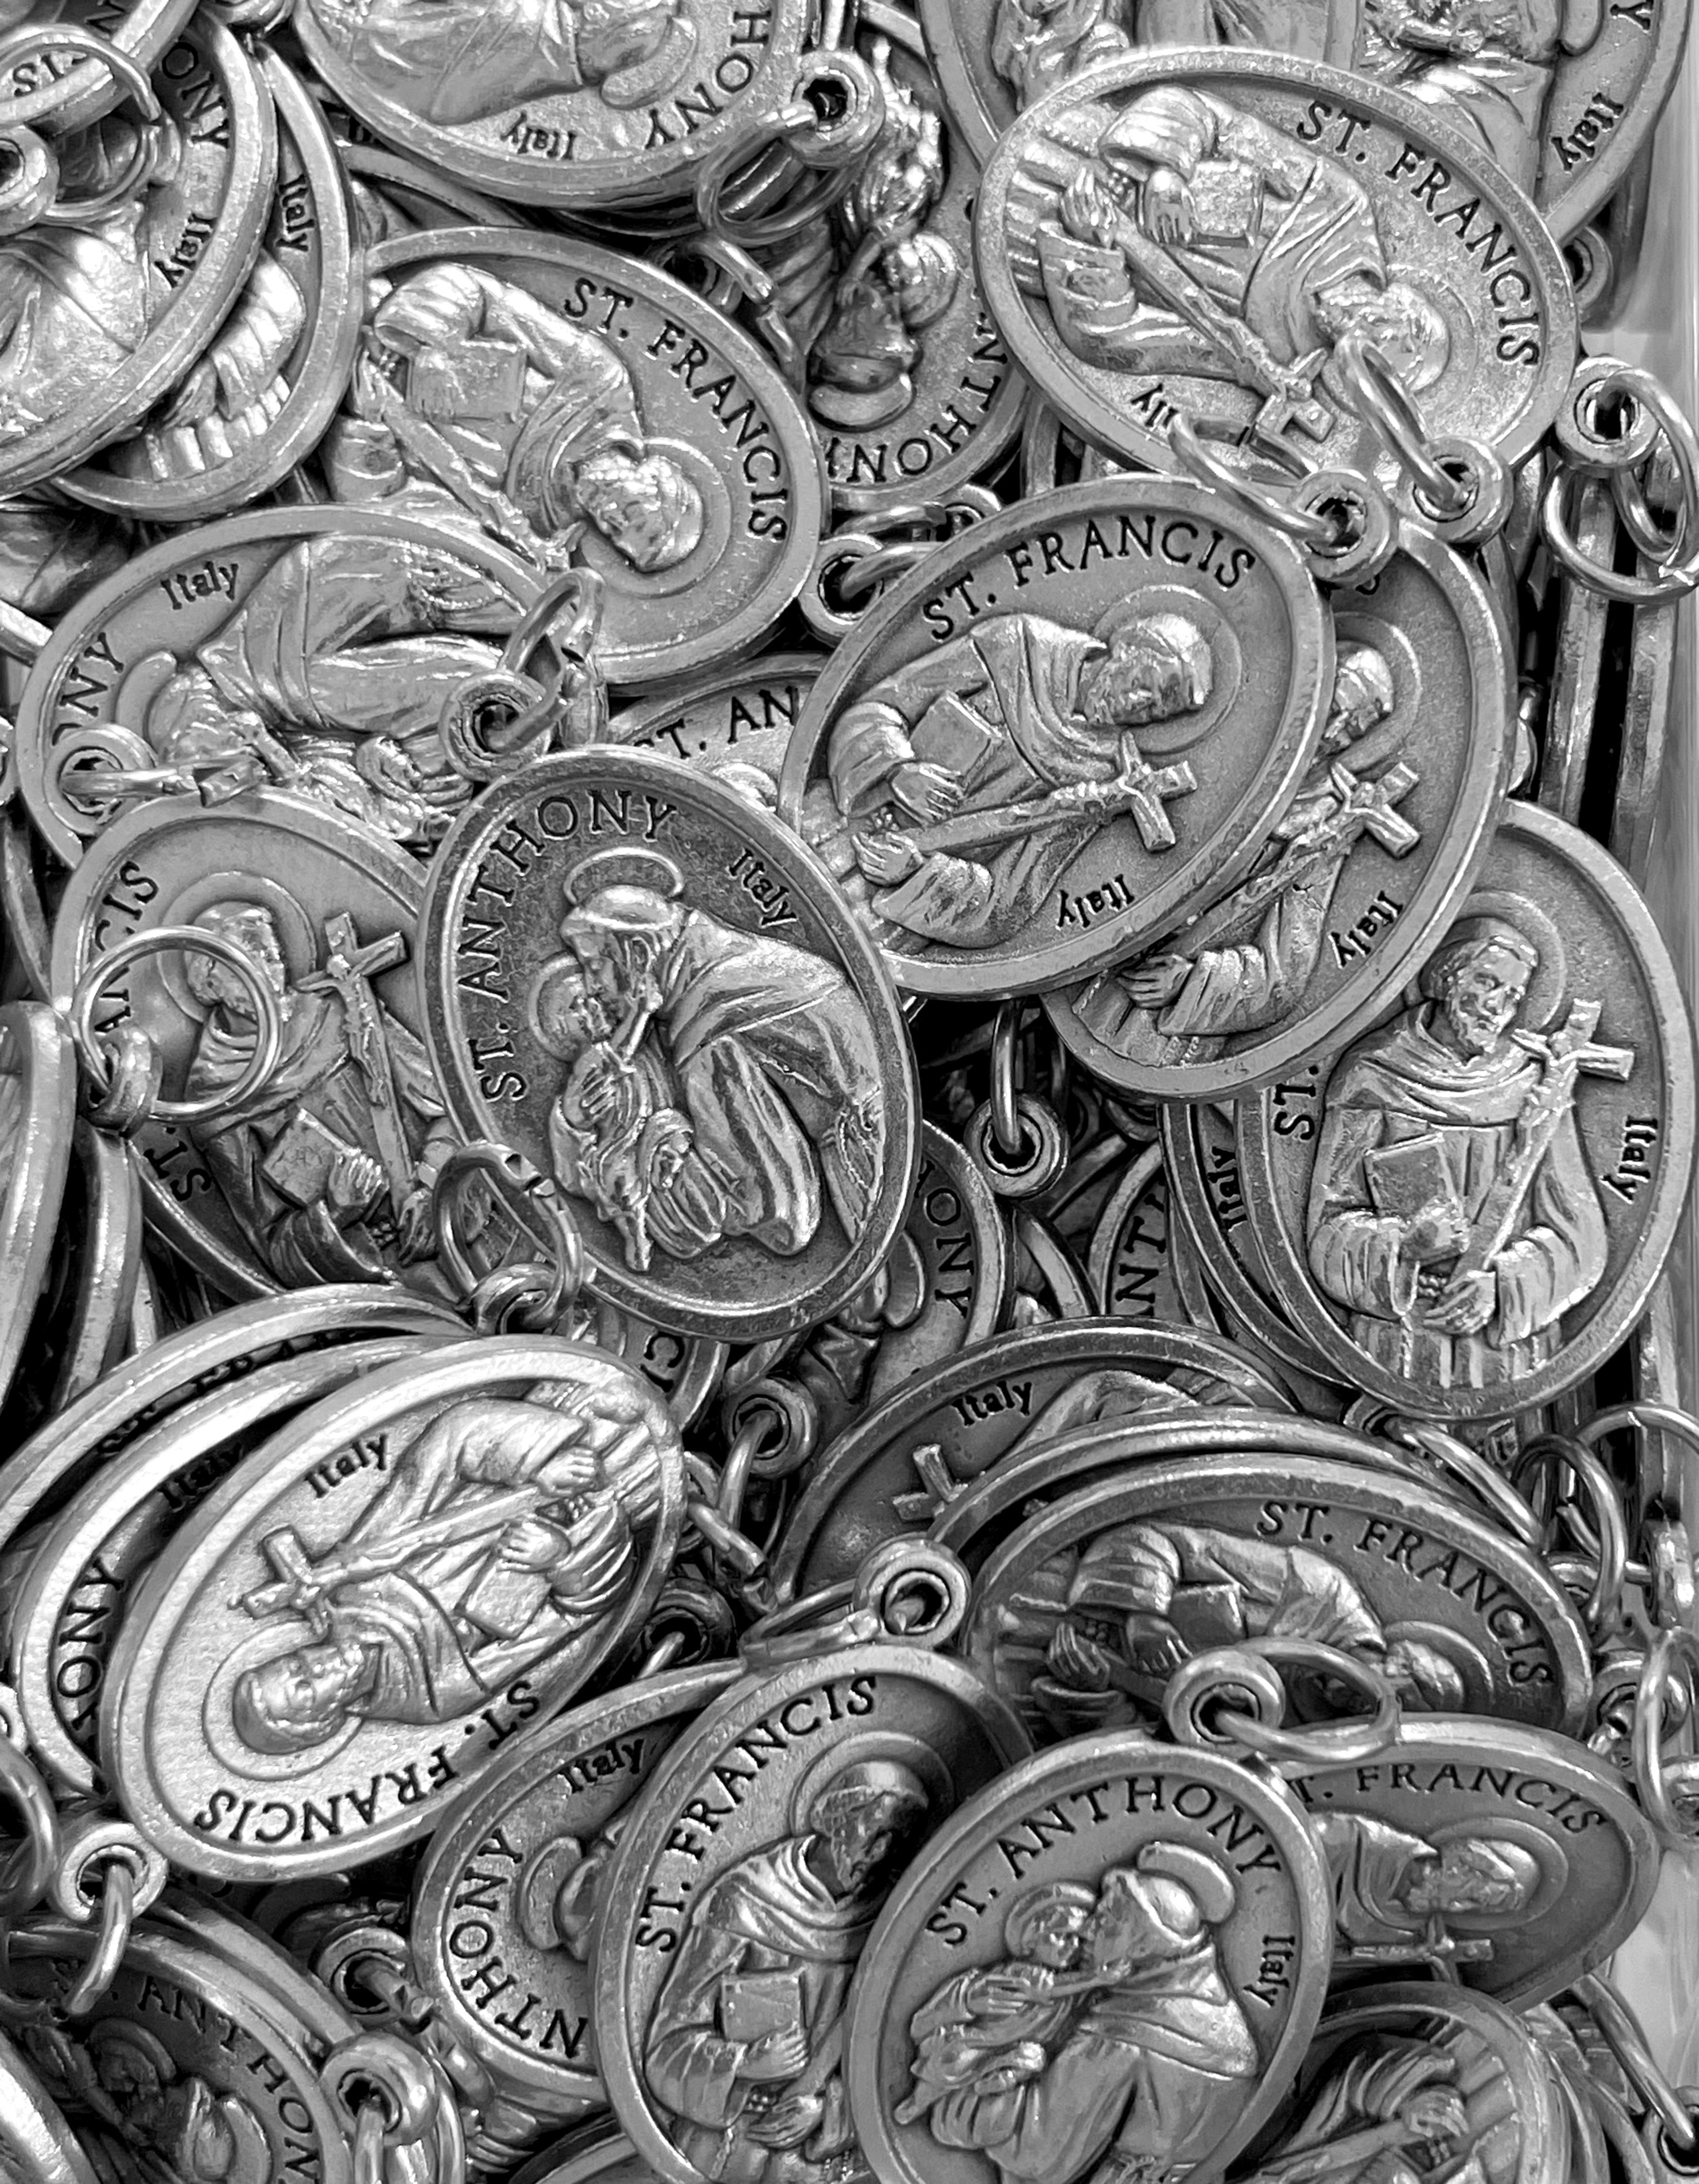 Pack of 12 Saints Medals in oxidized silver made in Italy 1.0" x 0.7"